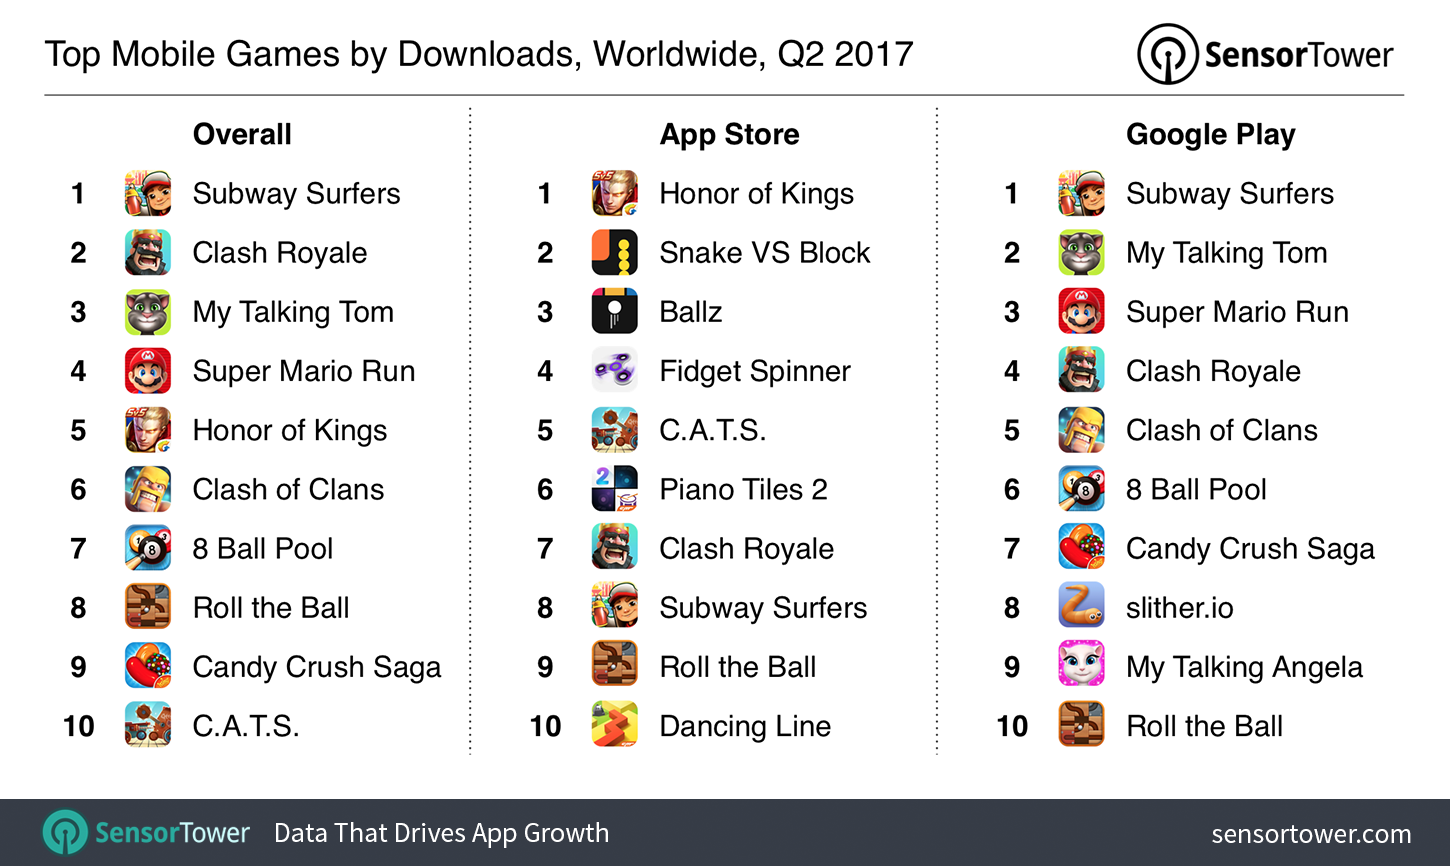 Q2 2017's Top Mobile Games by Downloads